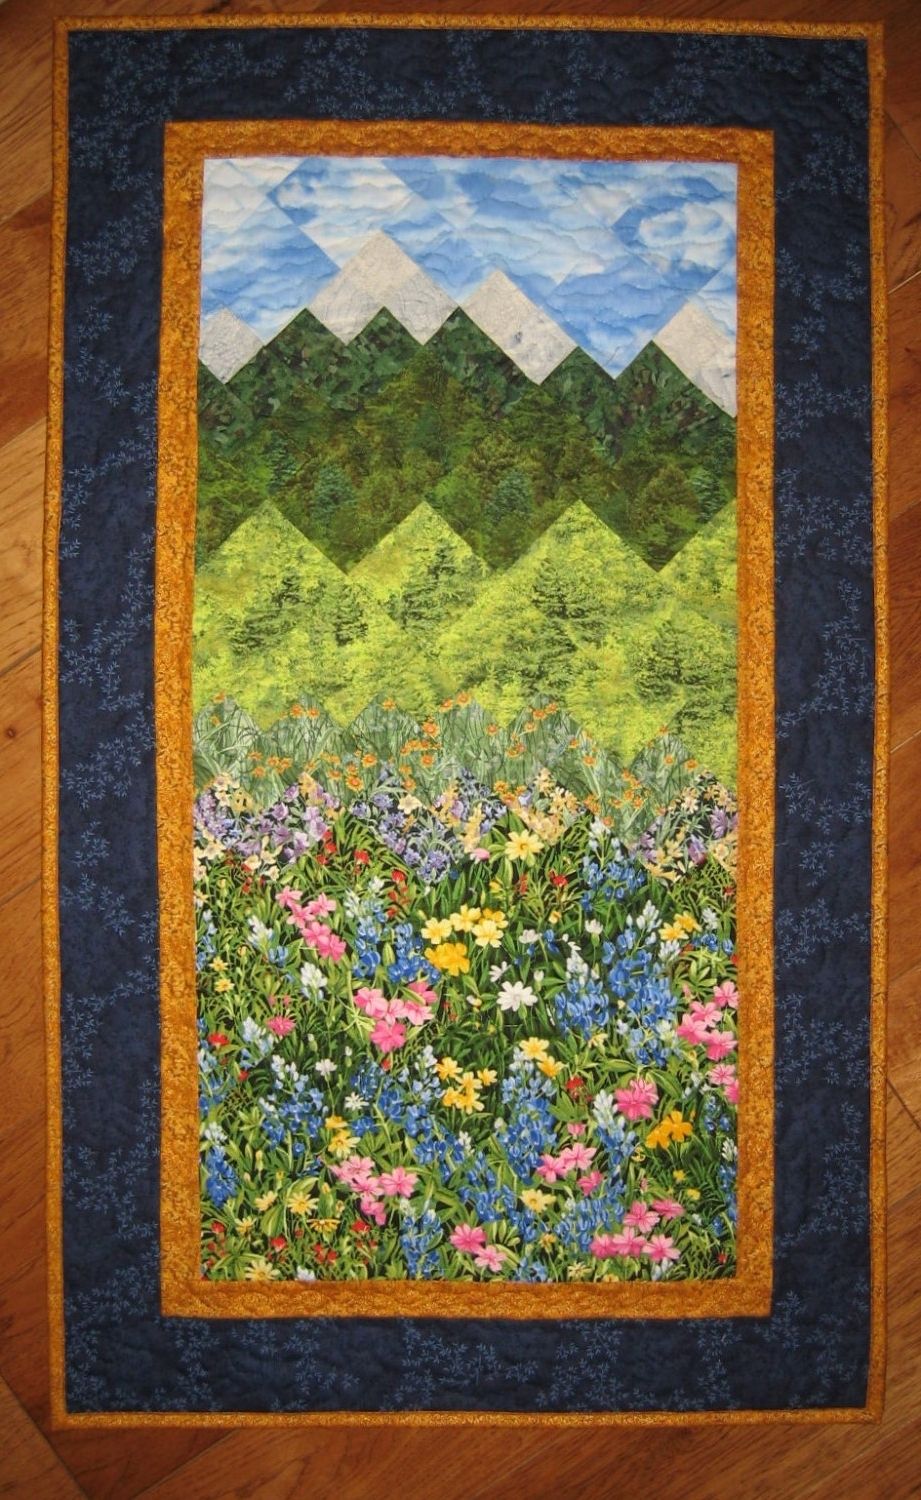 Fabric Wall Art Patterns For Newest Summer Flowers And Mountains Art Quilt Fabric Wall Hanging Quilted (View 10 of 15)